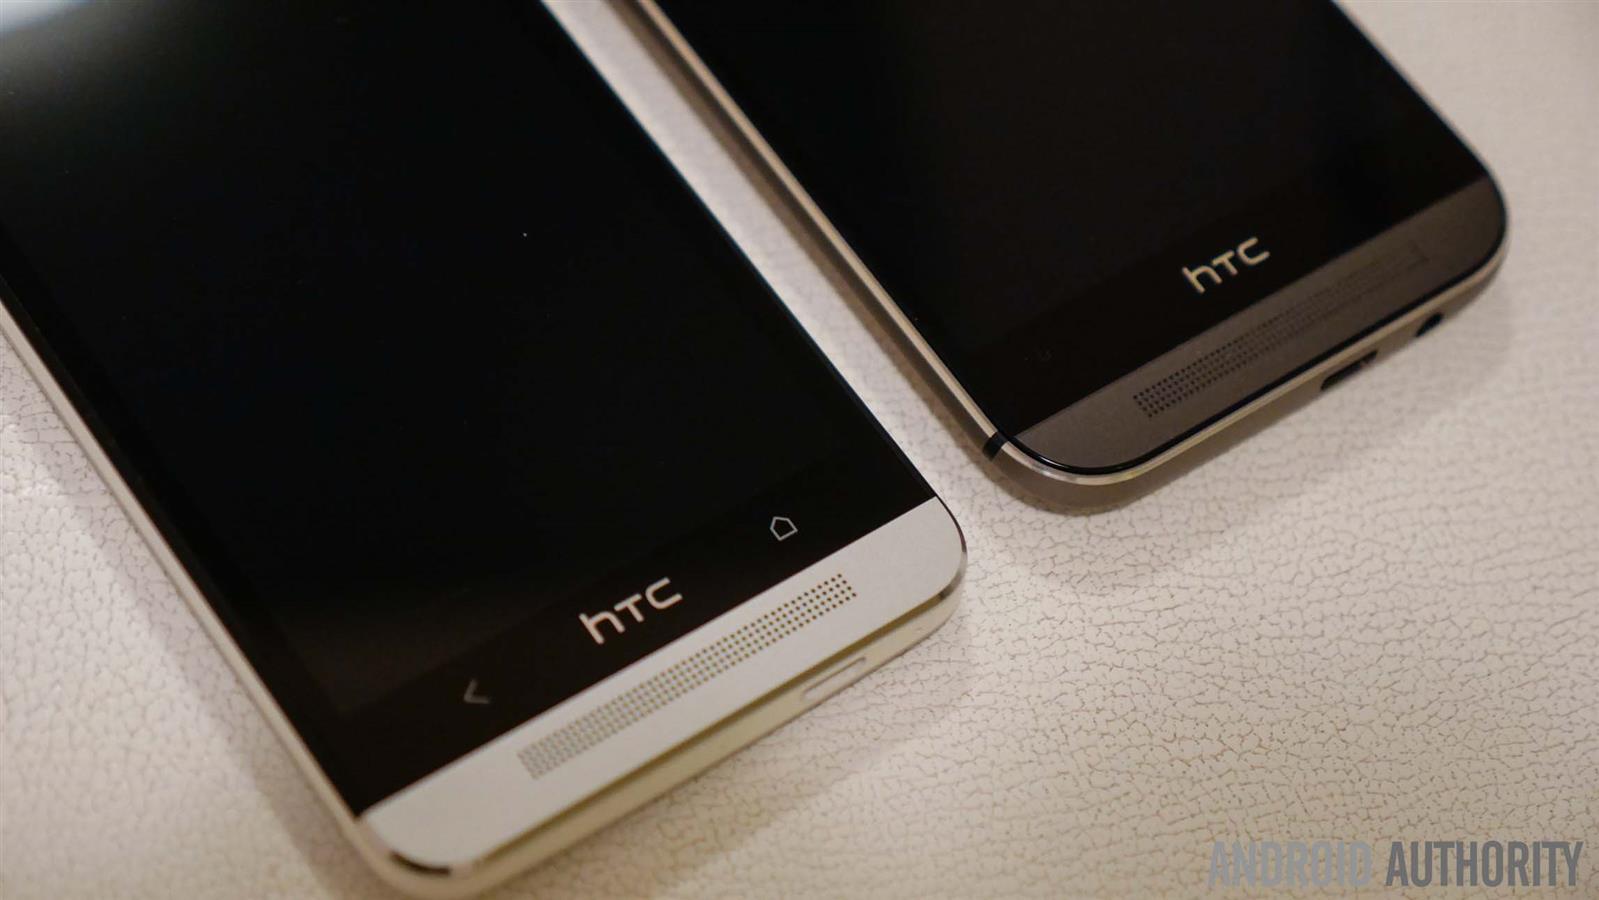 htc-one-m8-vs-htc-one-m7-quick-look-aa-5-of-191